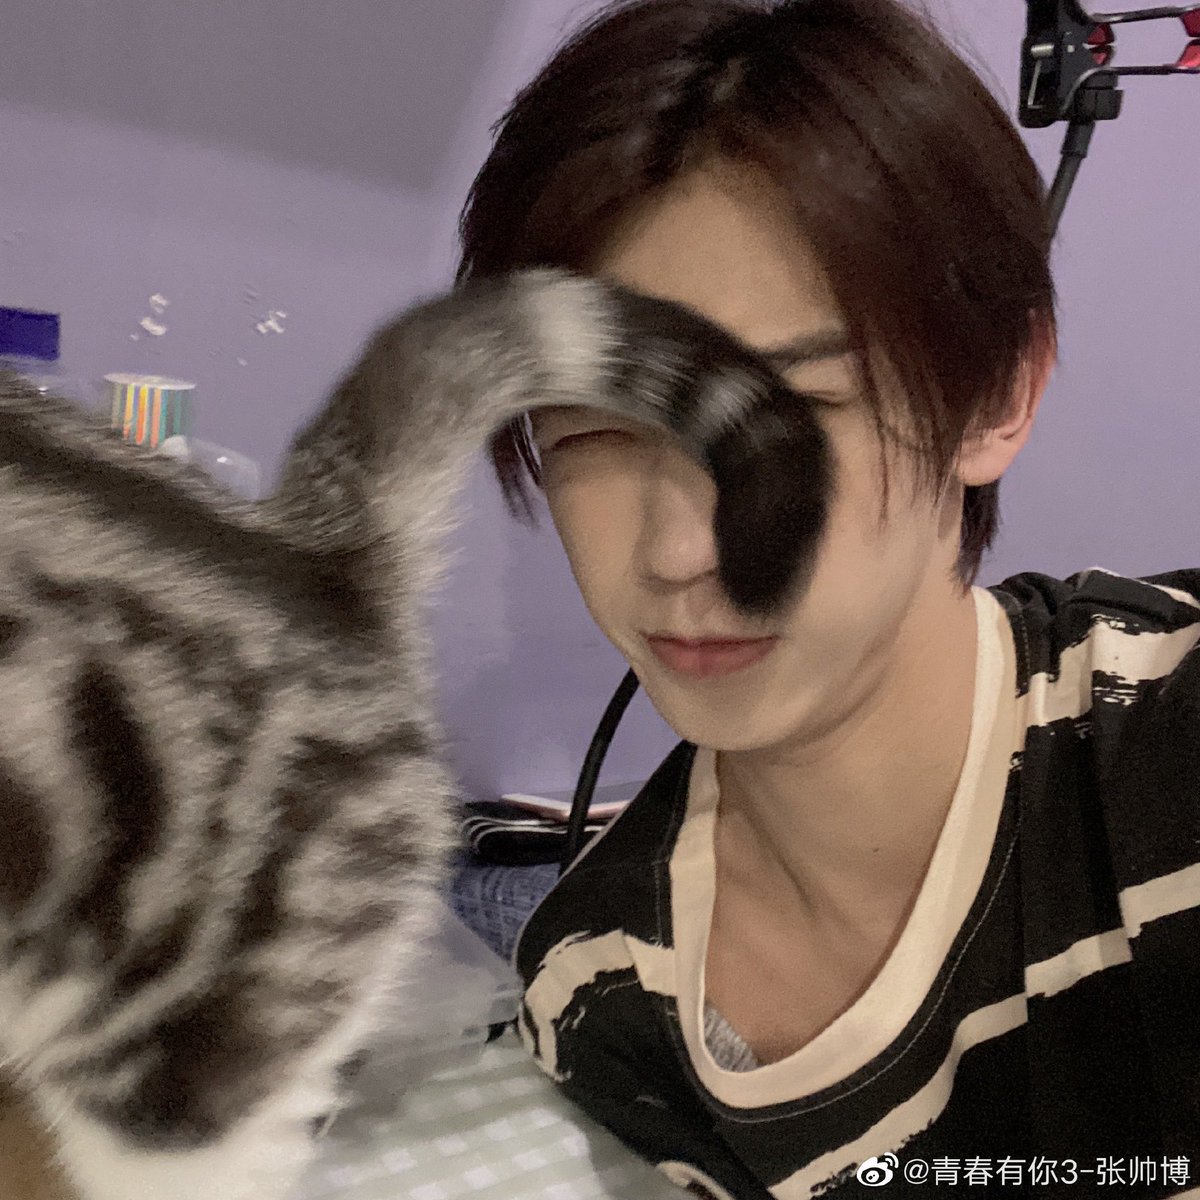 his favorite animal is cat! he owns a cat and he named his cat 石榴 (shi liu)